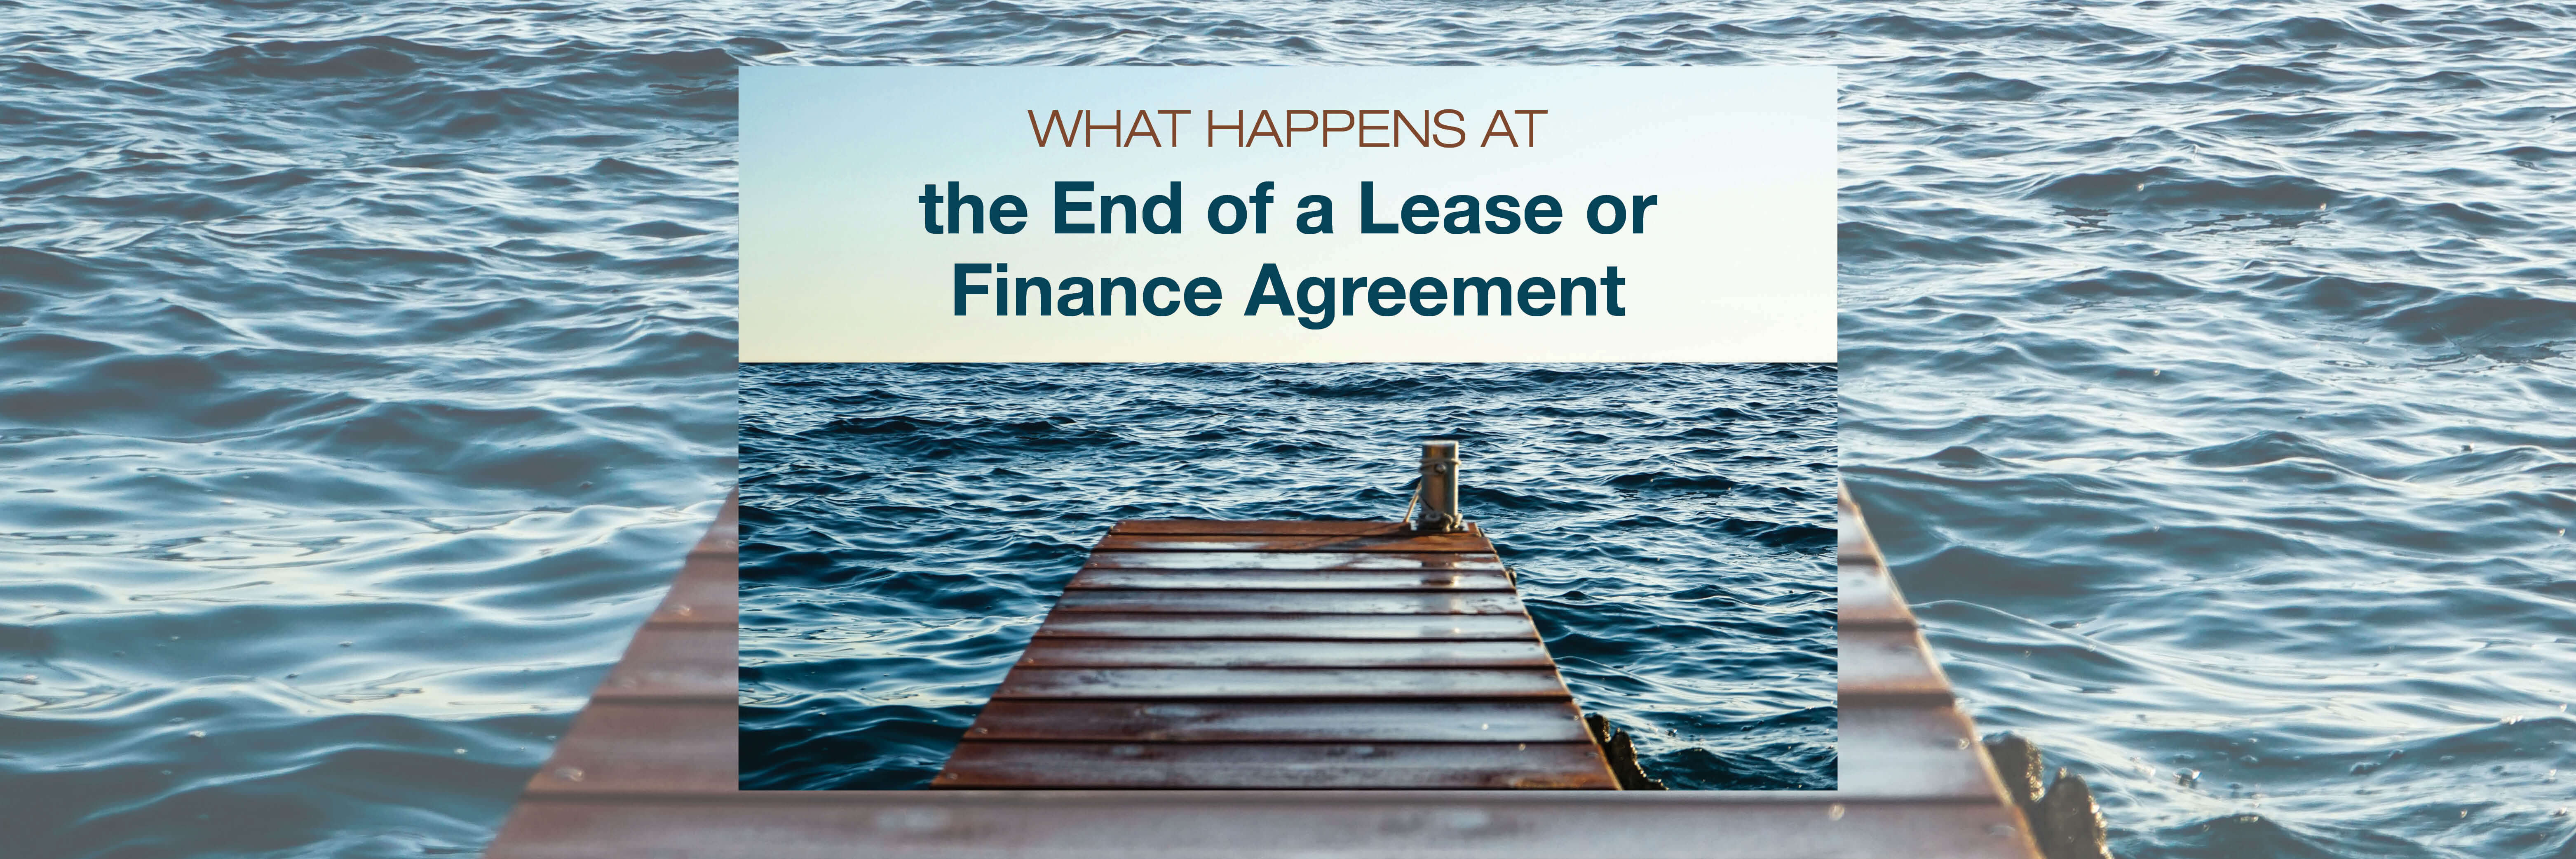 What Happens at the End of a Lease or Another Finance Agreement?